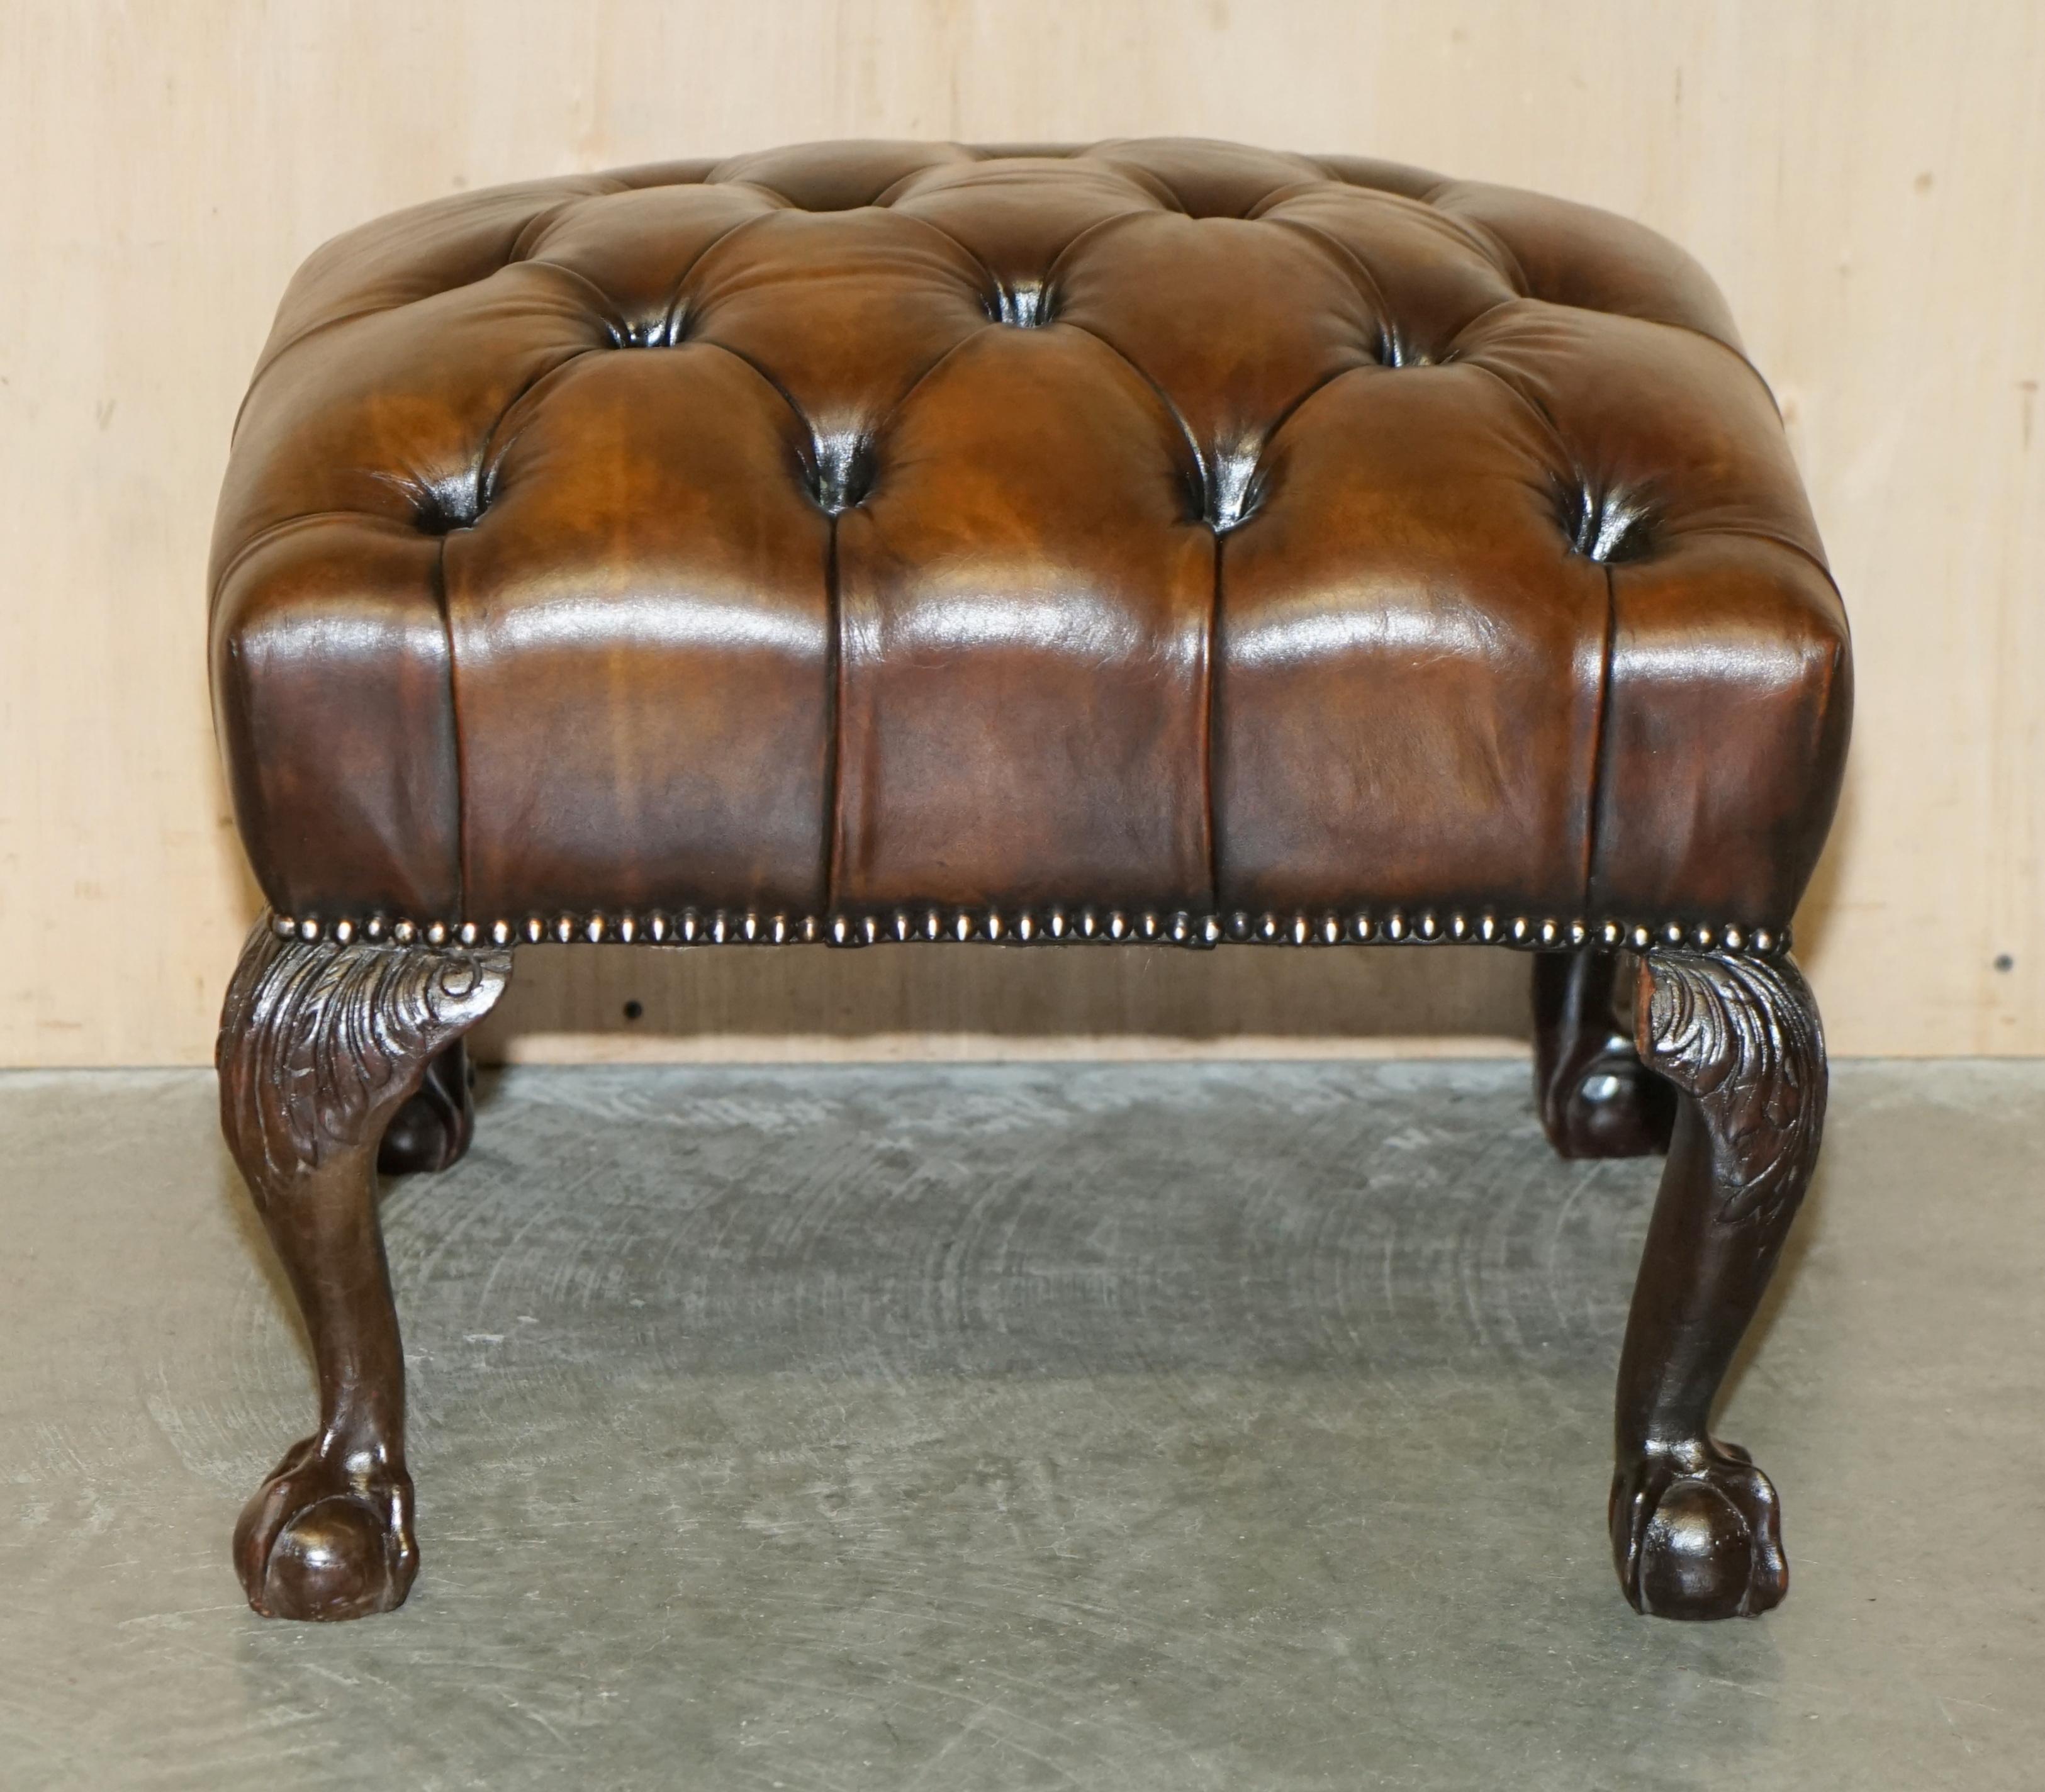 FINE ANTIQUE ViCTORIAN CLAW & BALL BROWN LEATHER RESTORED CHESTERFIELD FOOTSTOOL For Sale 12